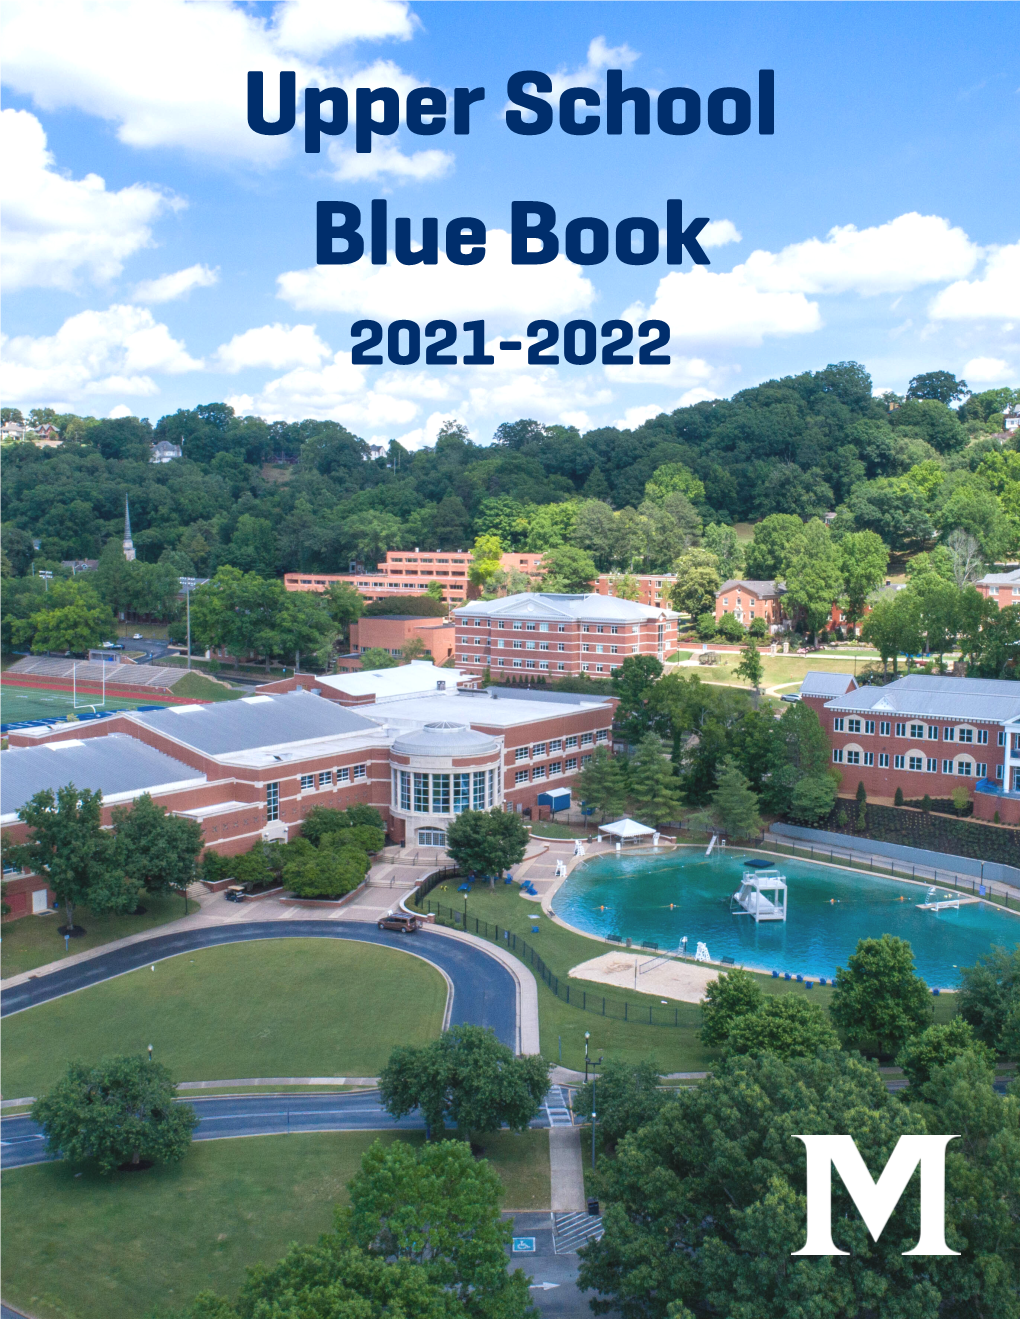 Upper School Blue Book 2021-2022 TABLE of CONTENTS